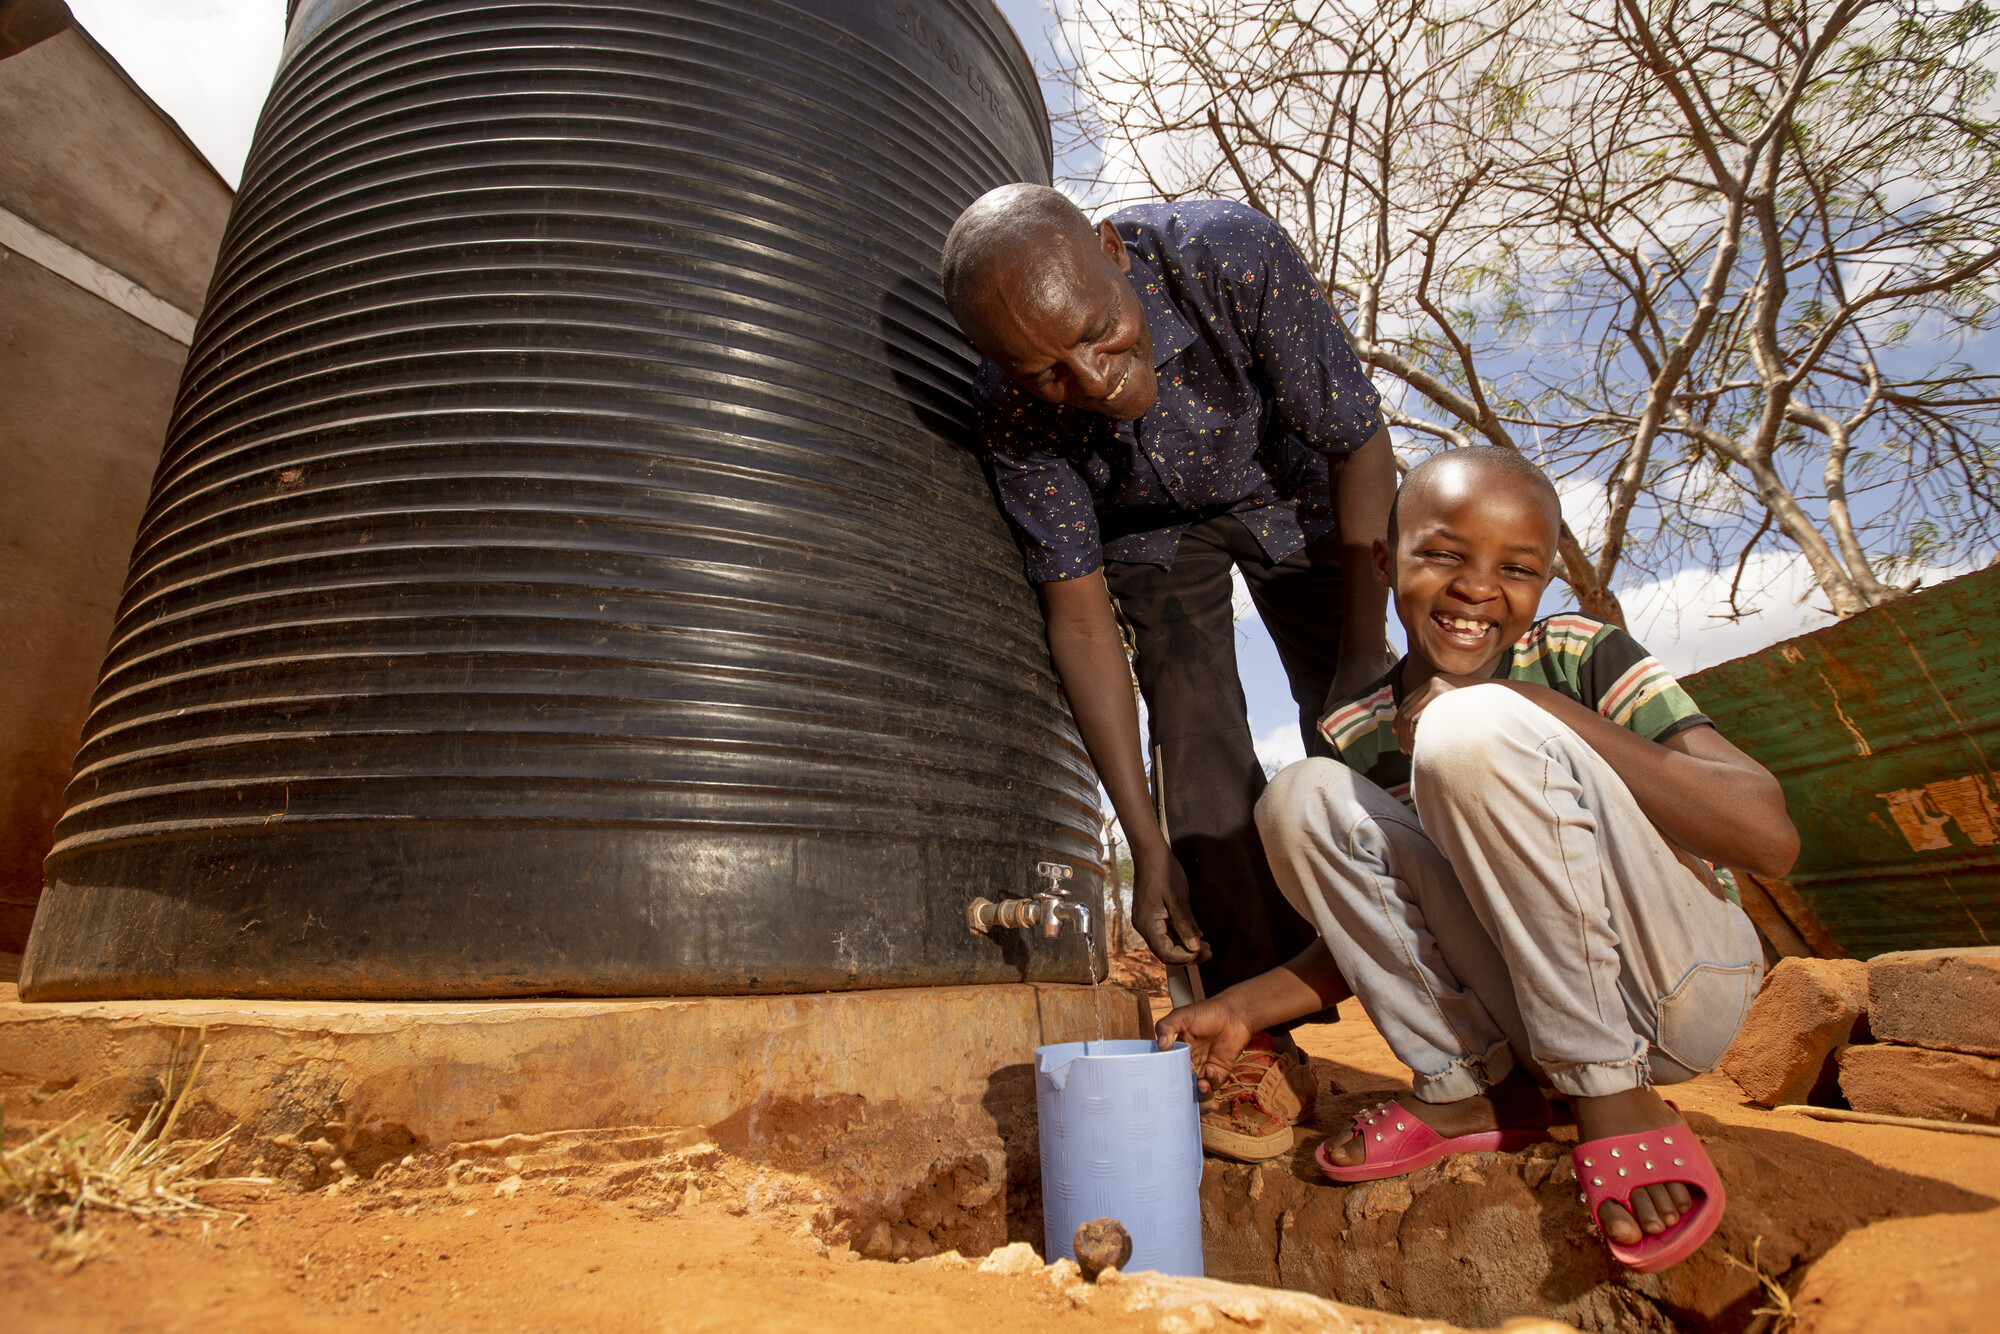 A father and son collect water from a large outdoor rain barrel